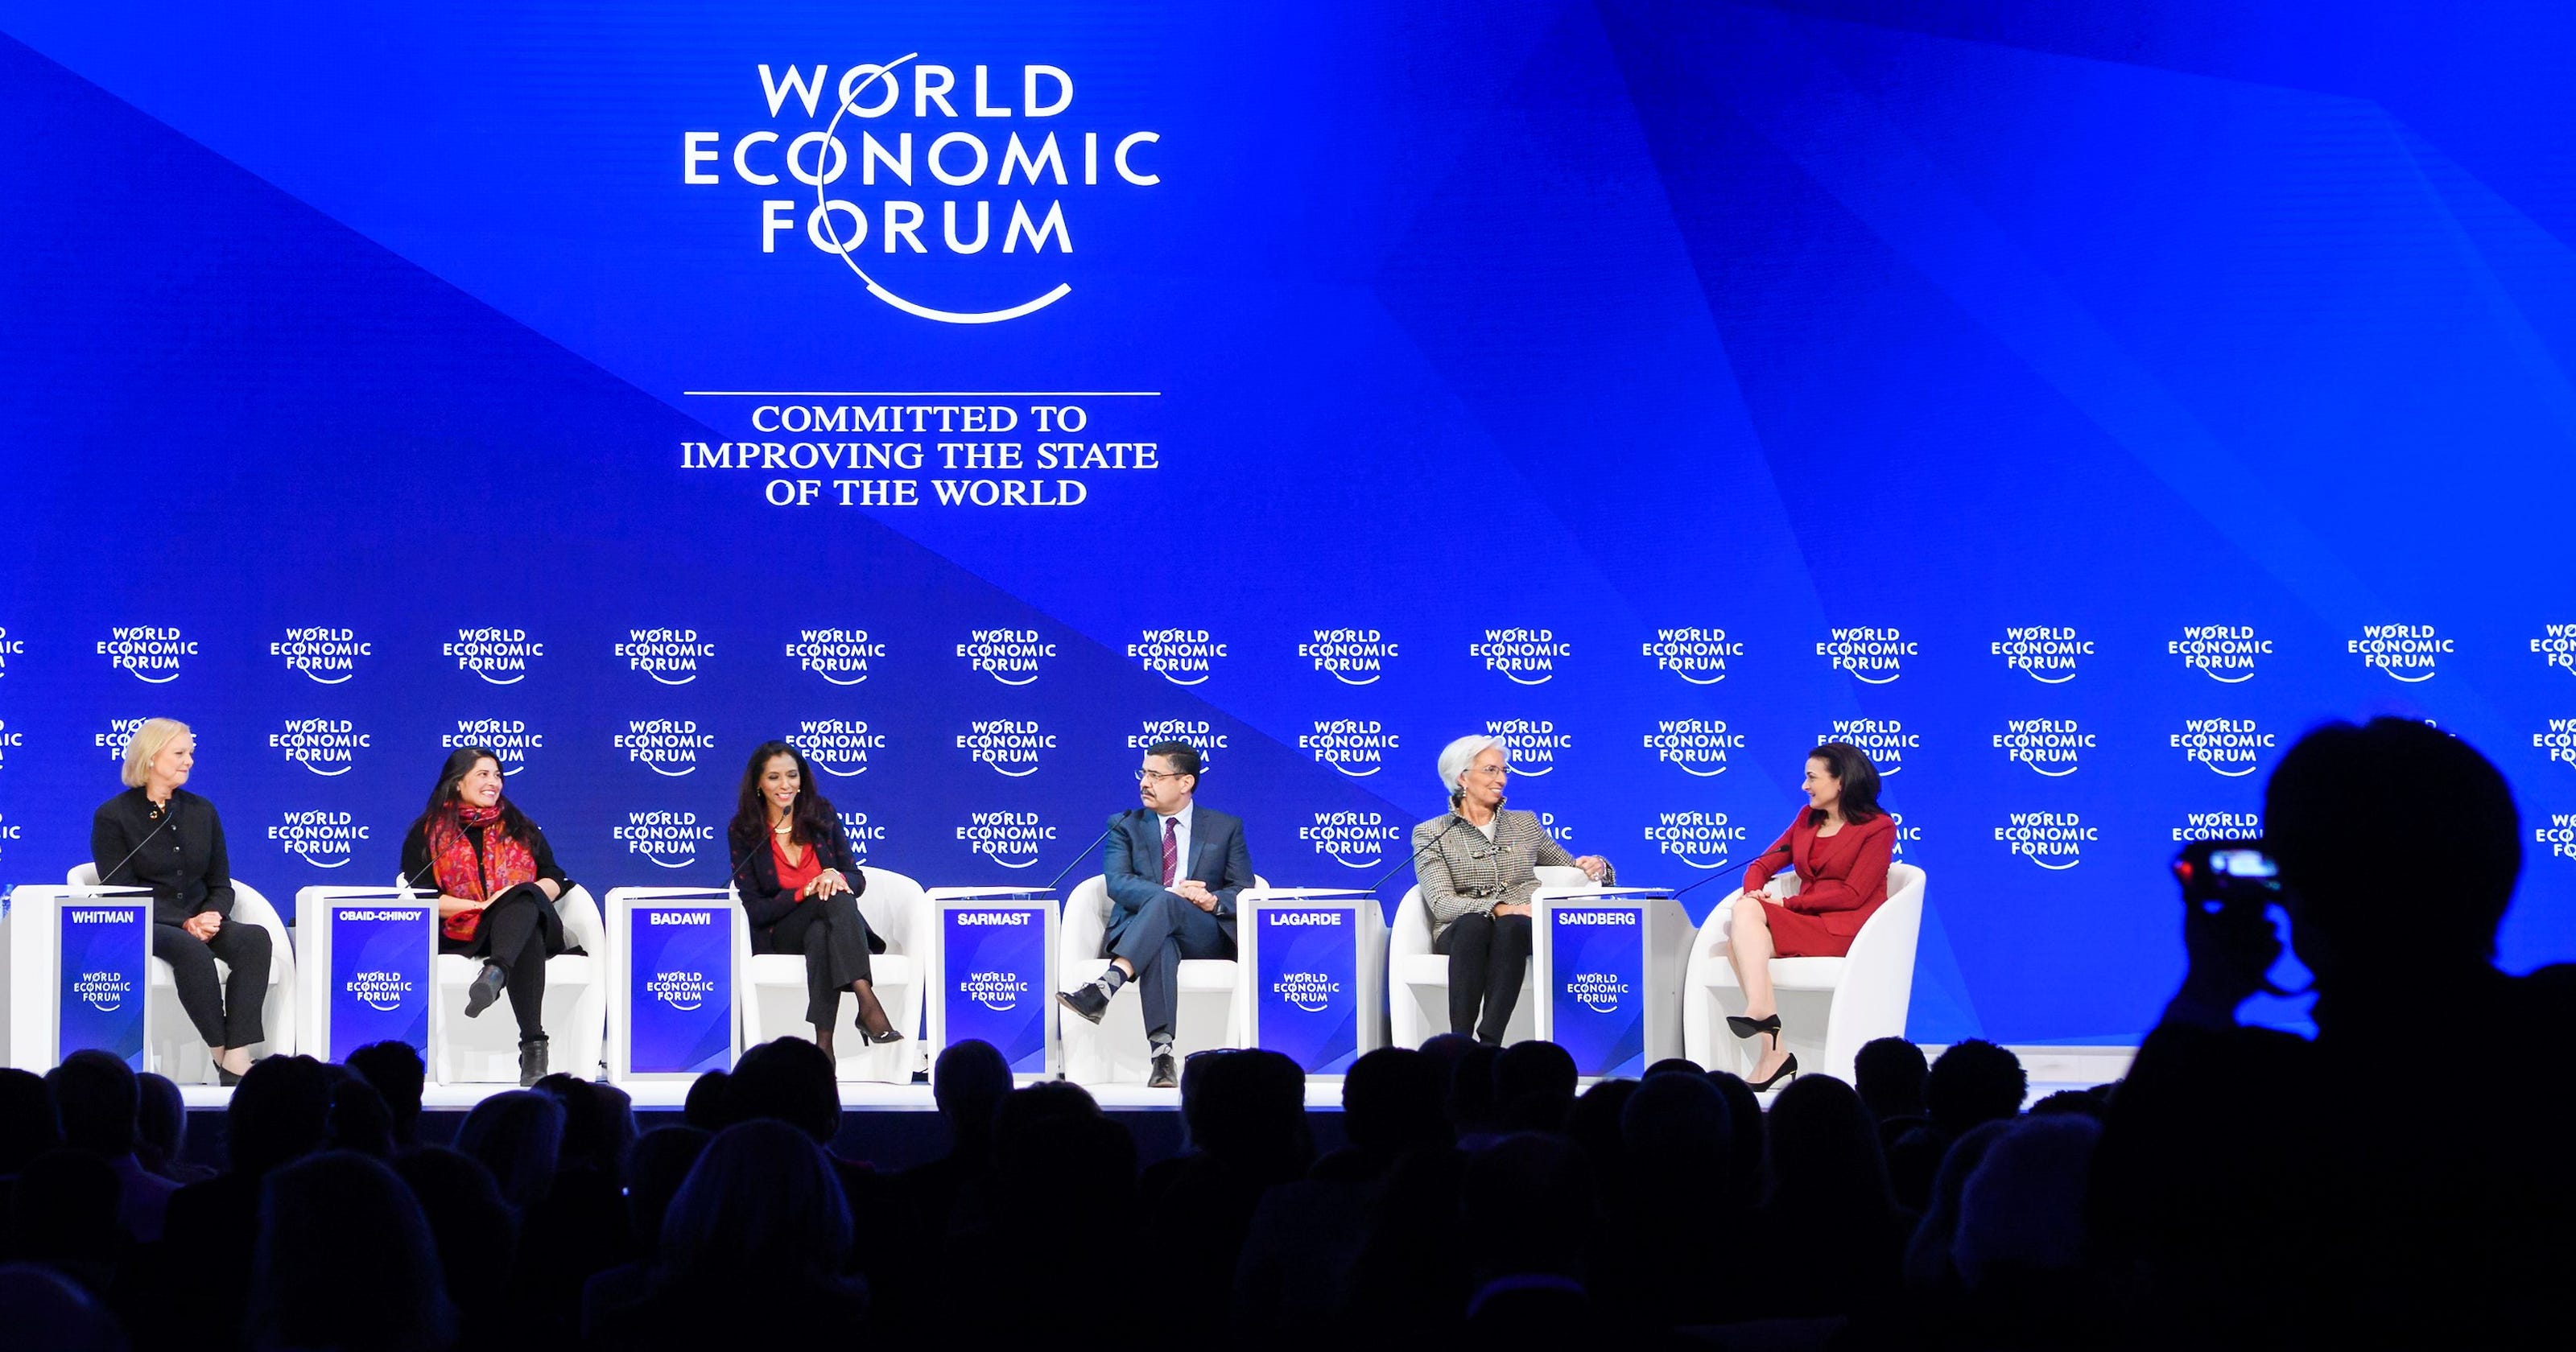 A look at the World Economic Forum in Davos